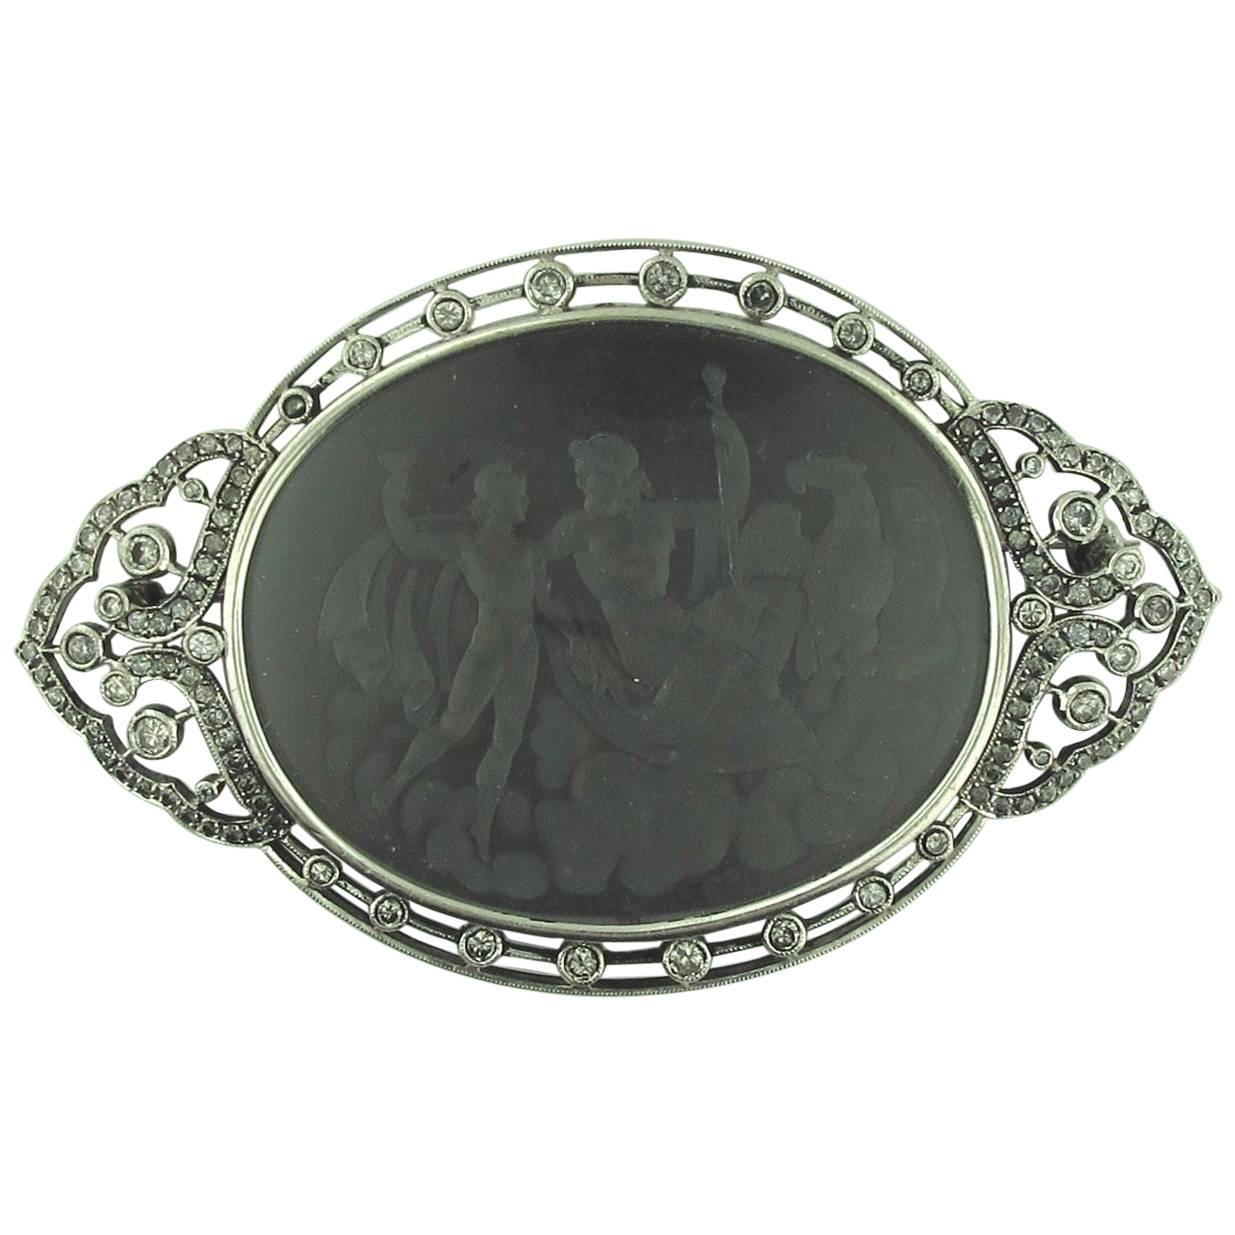 Signed "Putti" Platinum Black Onyx Brooch or Pendant, circa 1920 For Sale